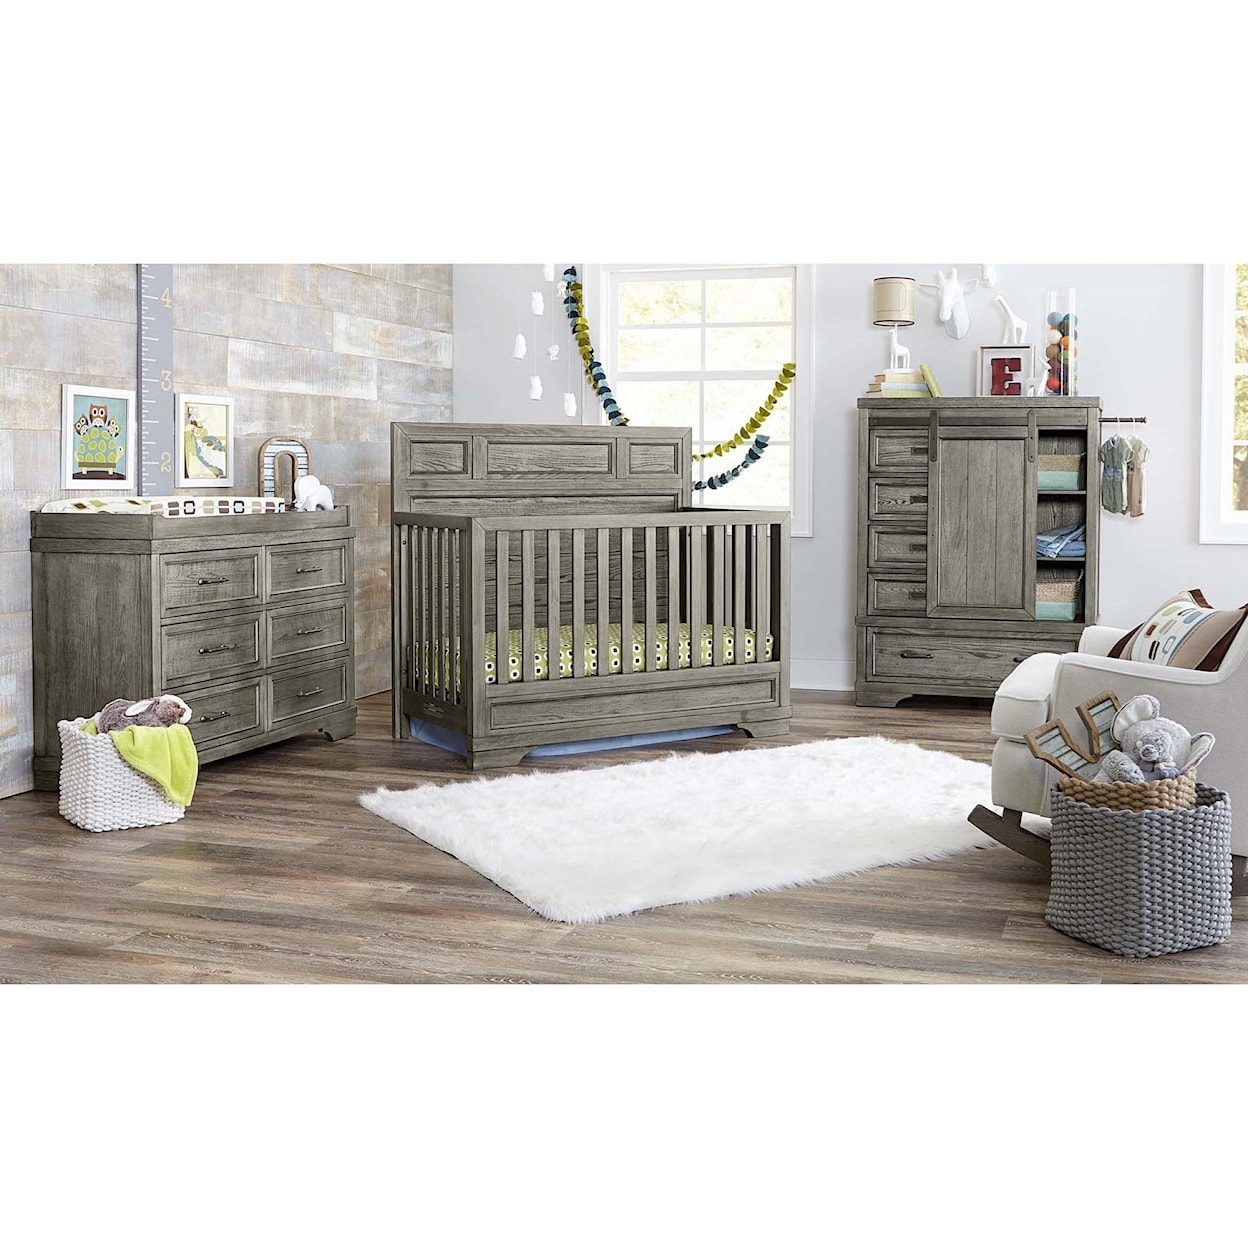 Westwood Design Foundry Baby Bedroom Group with Crib